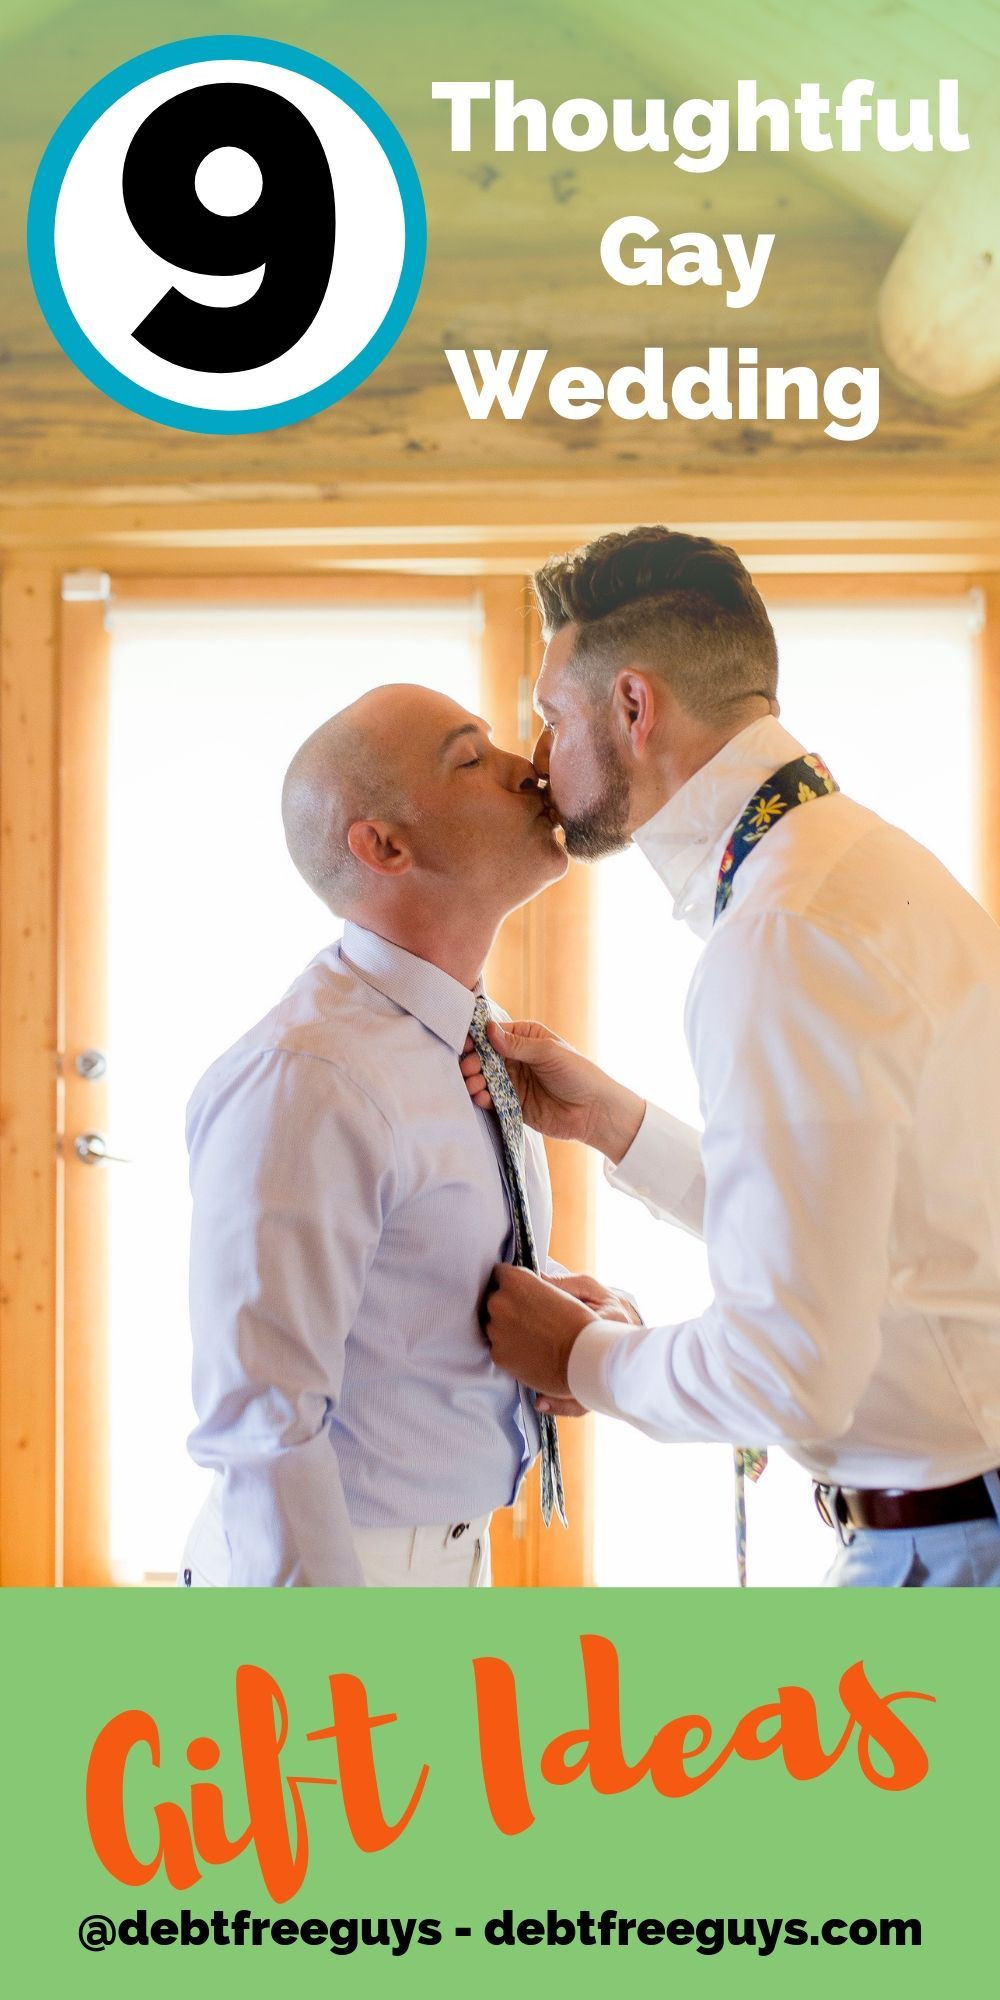 Wedding Gift Ideas For Gay Couple
 Pin on MoneyConscious